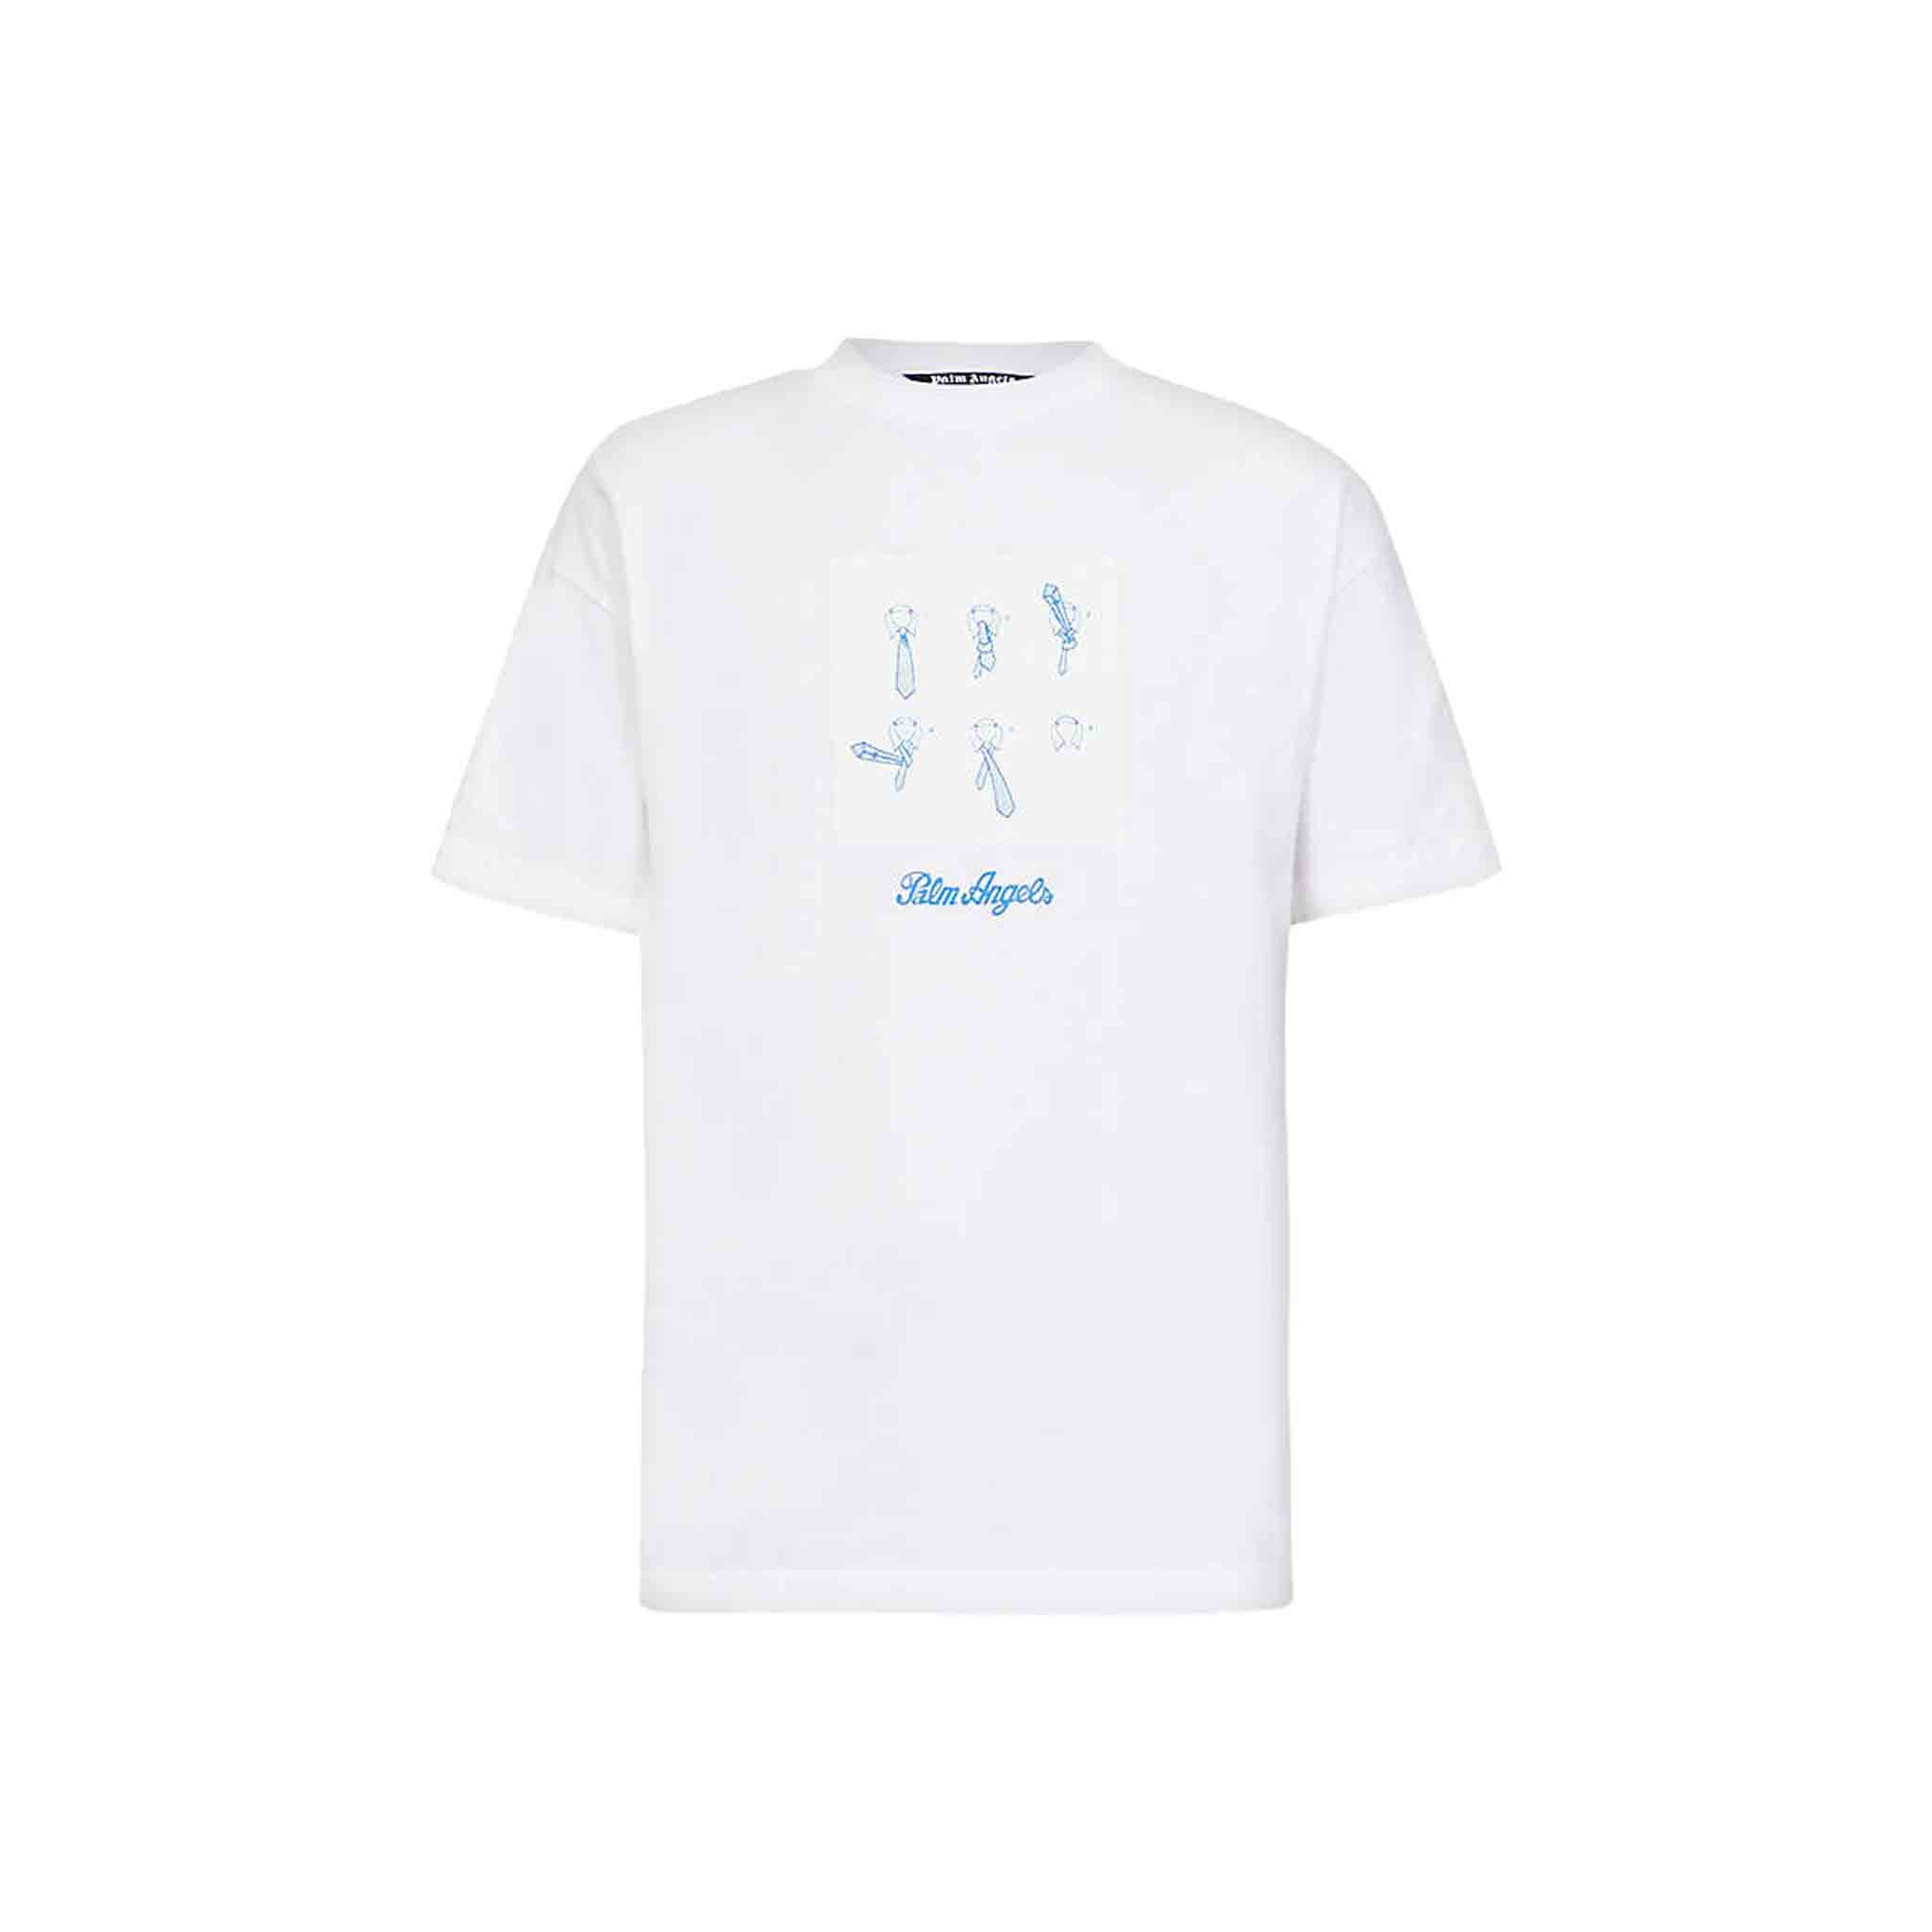 Stay stylish and comfortable in this Palm Angels t-shirt. The 